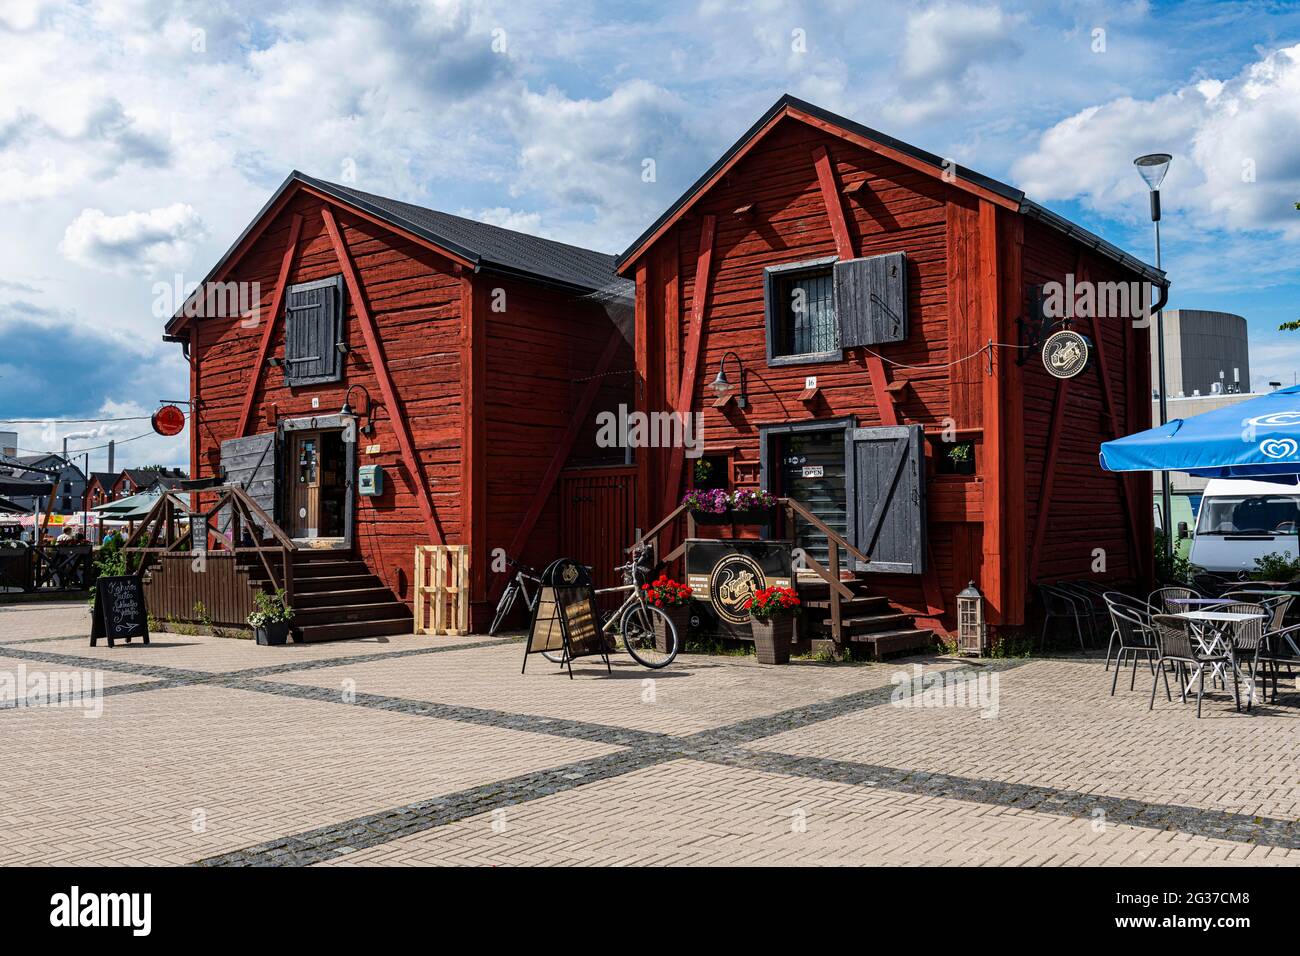 Boat sheds in Oulu, Finland Stock Photo